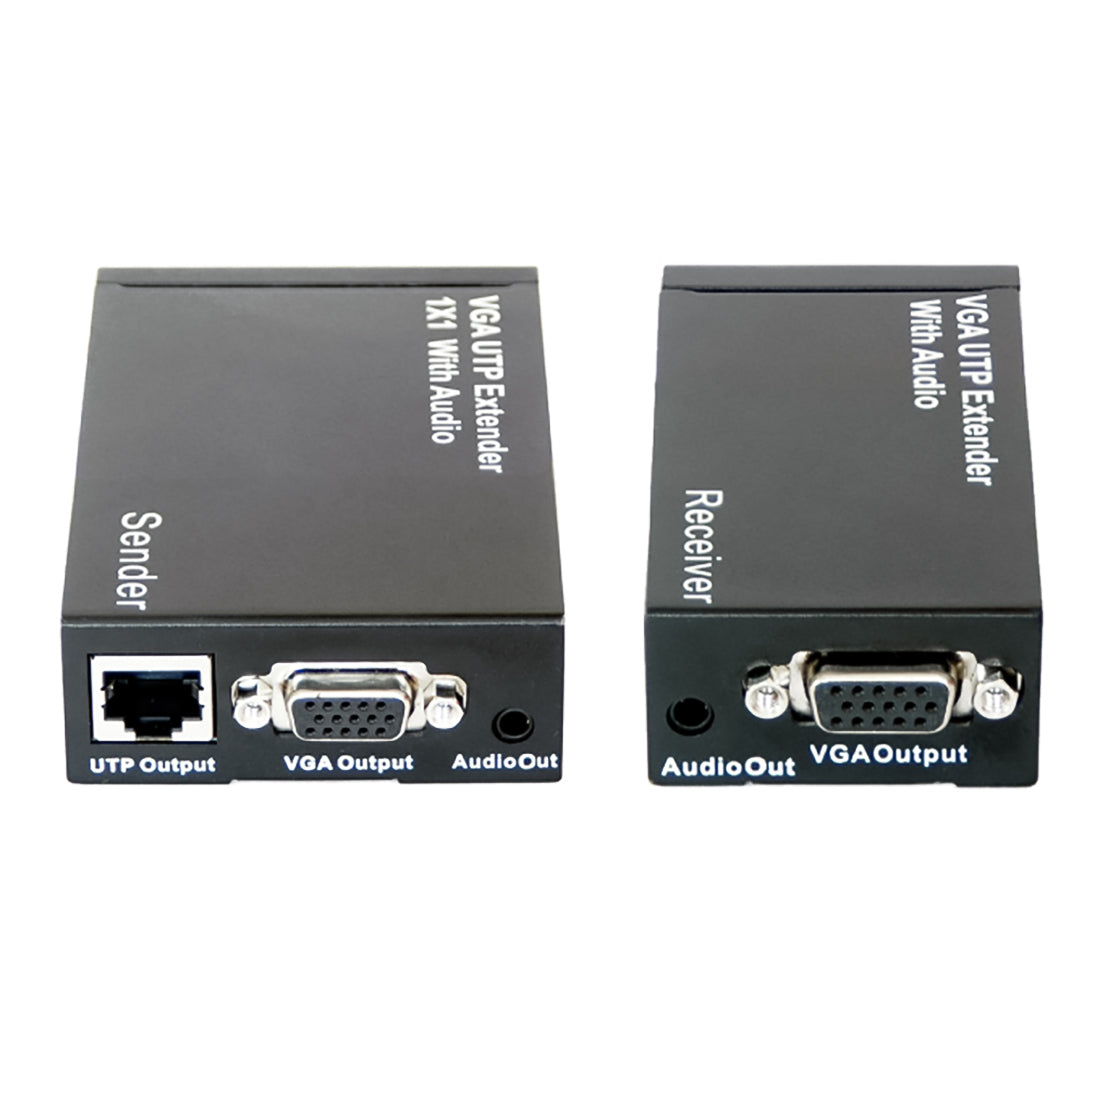 GBC VGA Extender Adapter to Ethernet Cable up to 300m with Audio, VGA Extender